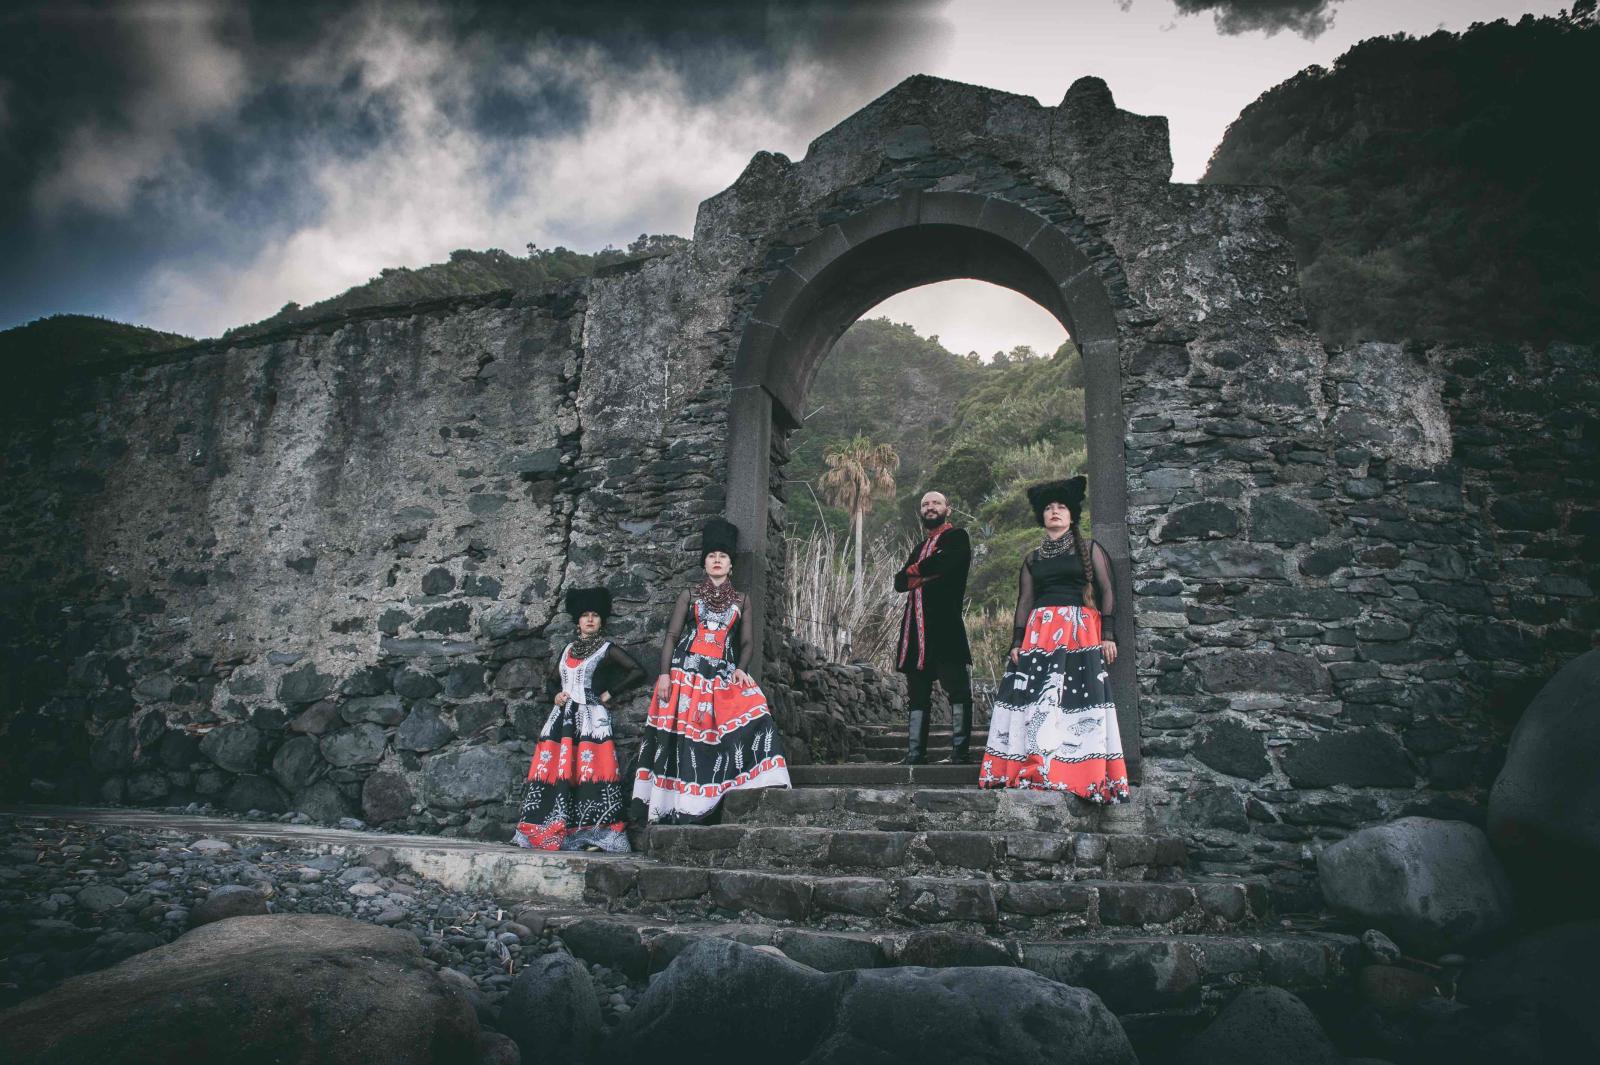 Musicians of DakhaBrakha standing underneath a stone arch, with blue sky above.